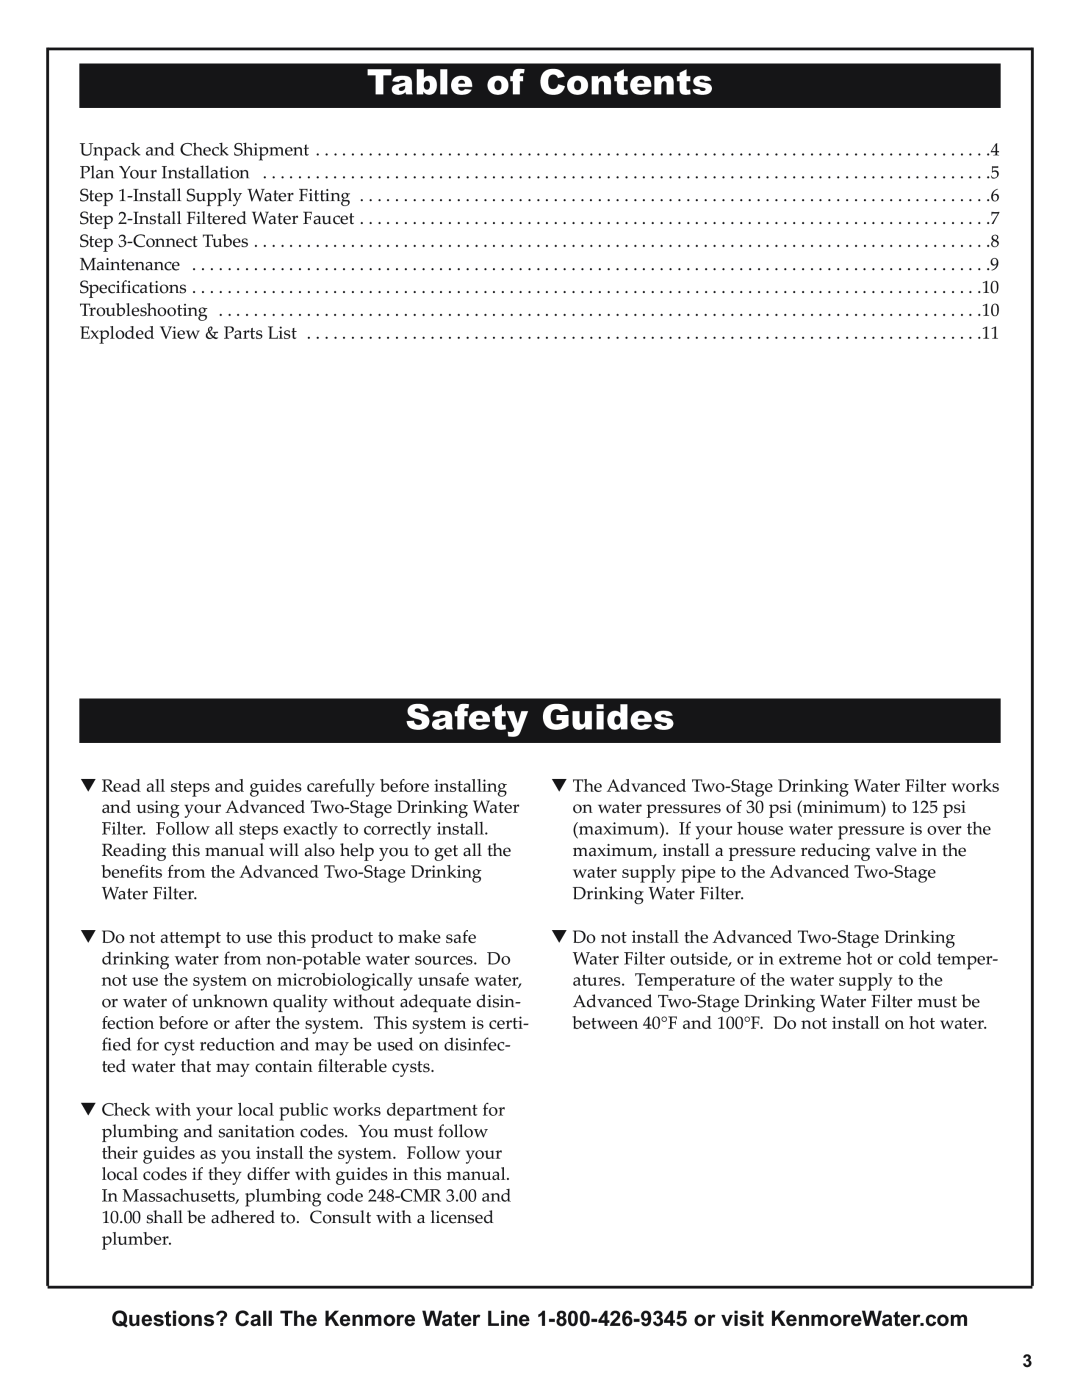 Kenmore 625.38501 manual Table of Contents, Safety Guides 